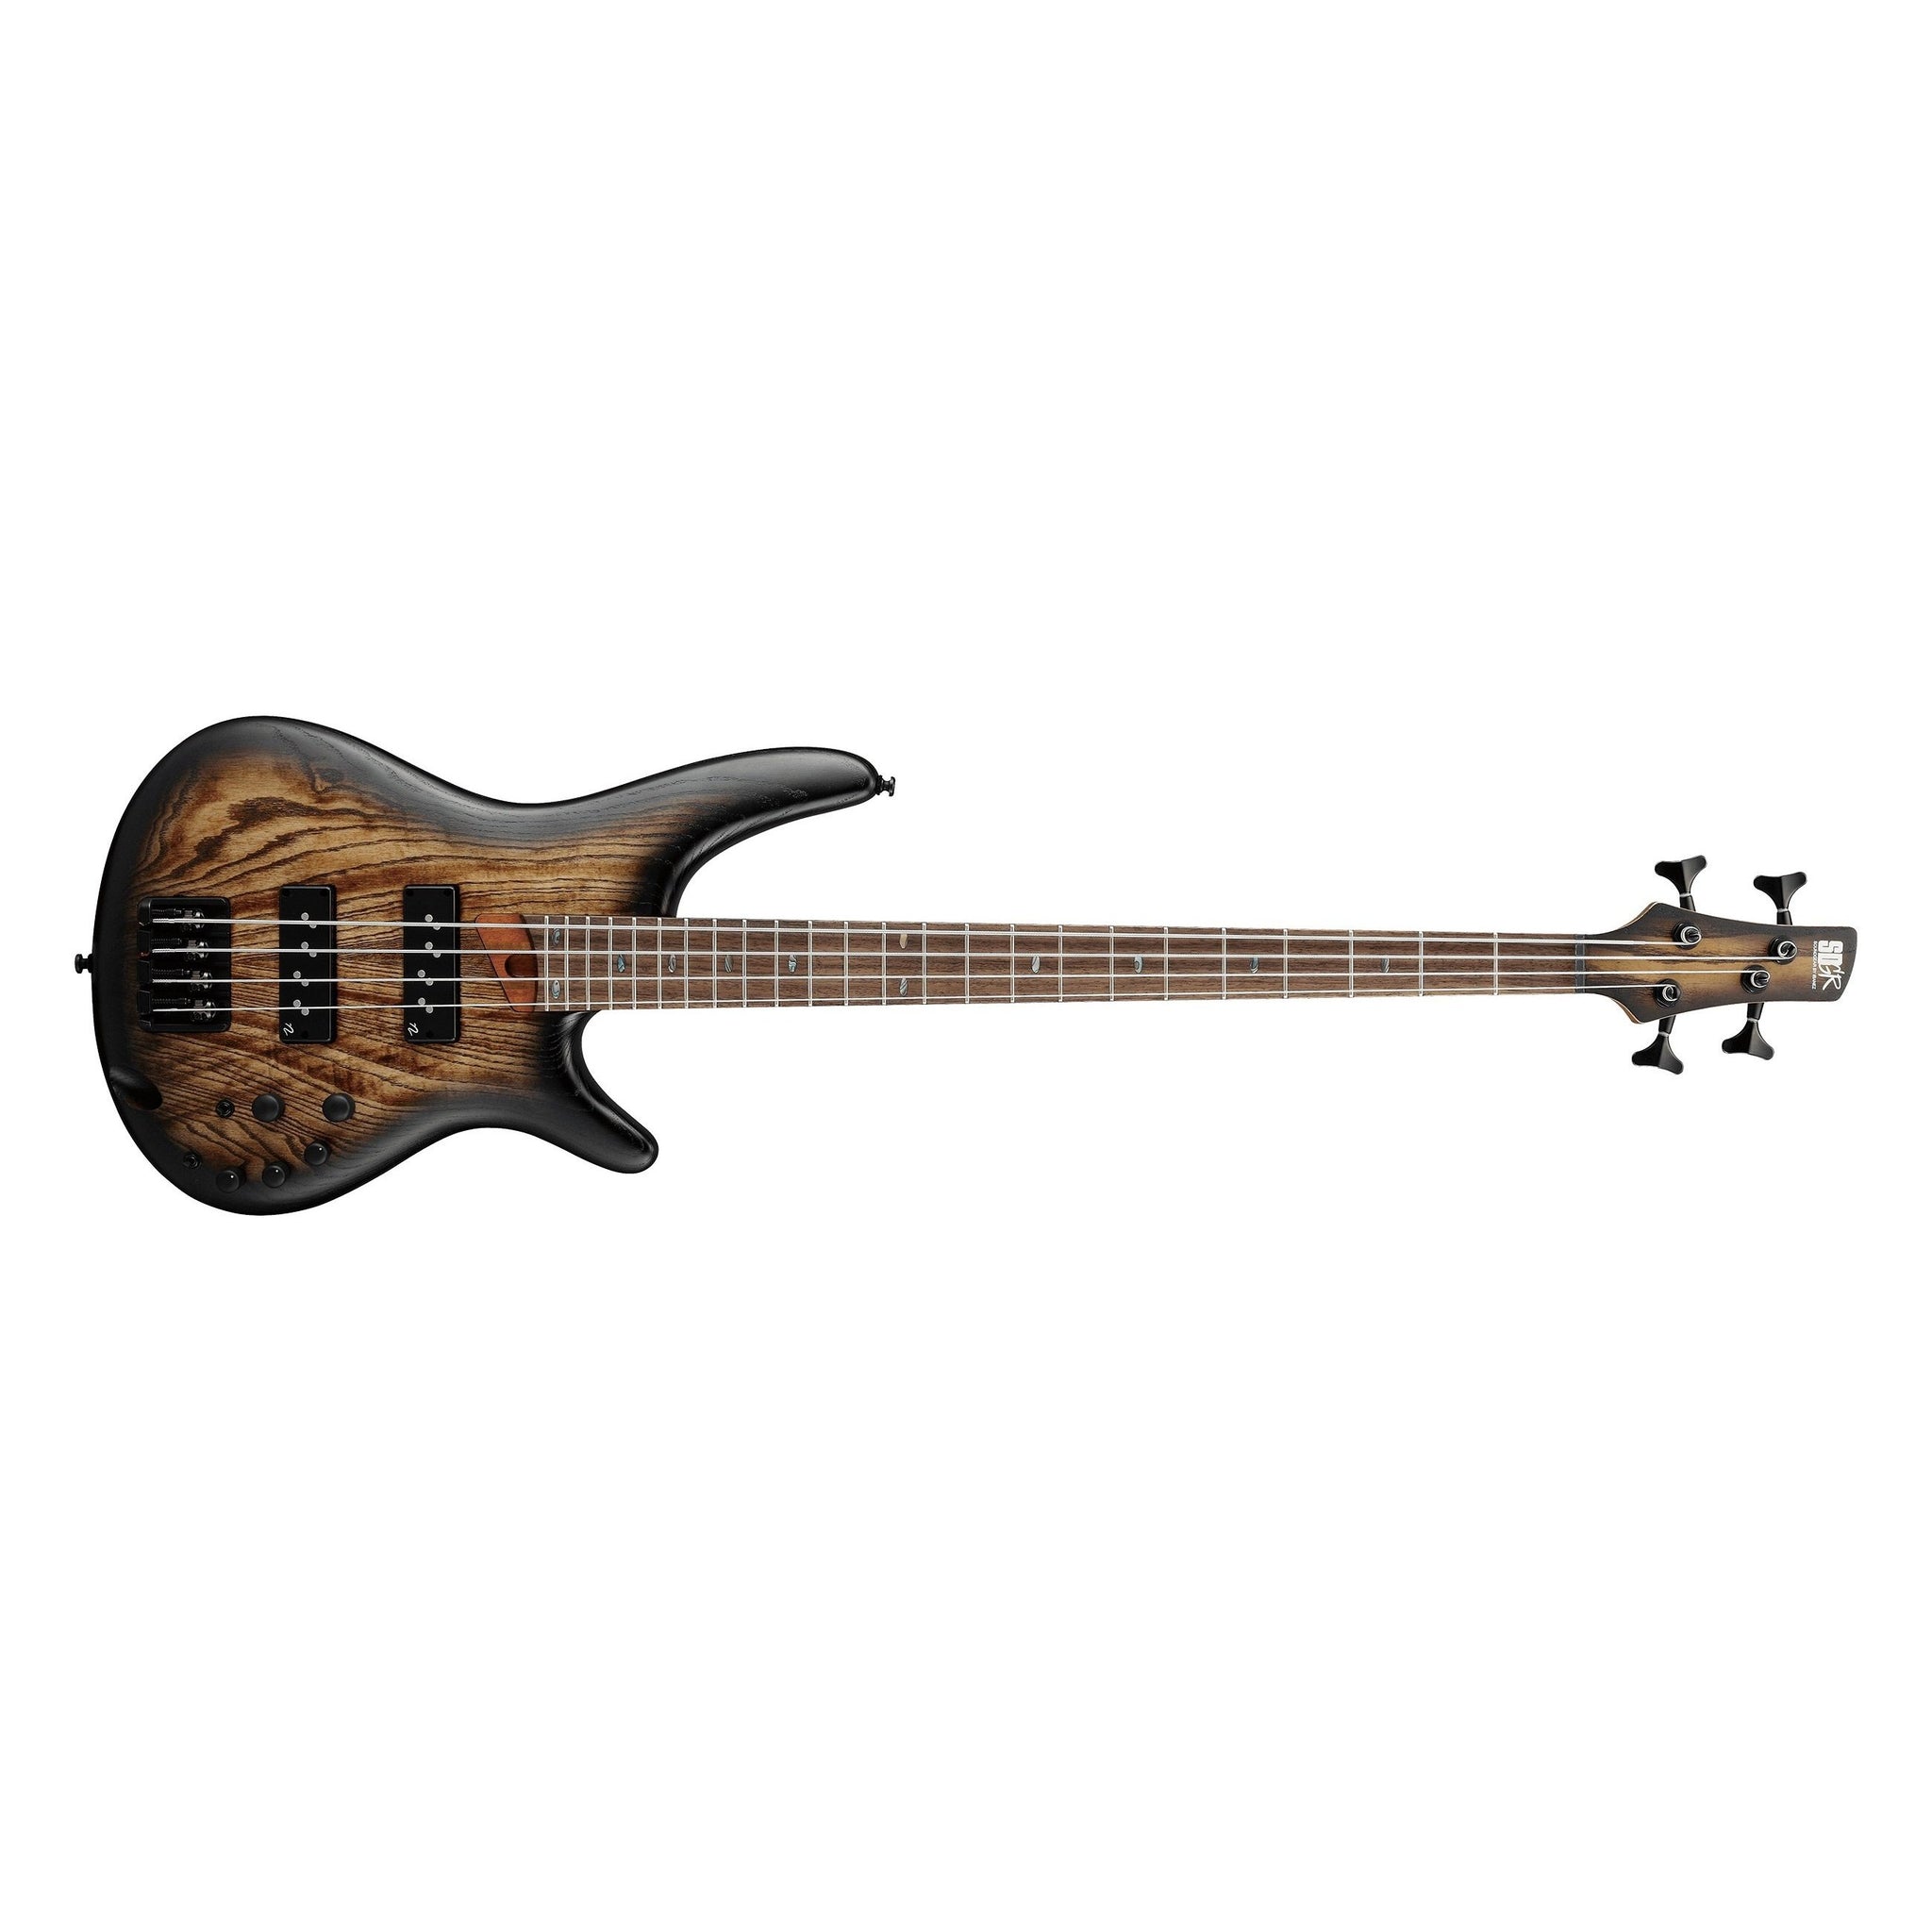 Ibanez SR600E-AST SR Standard Electric Bass-Antique Brown Stained Burst-Music World Academy